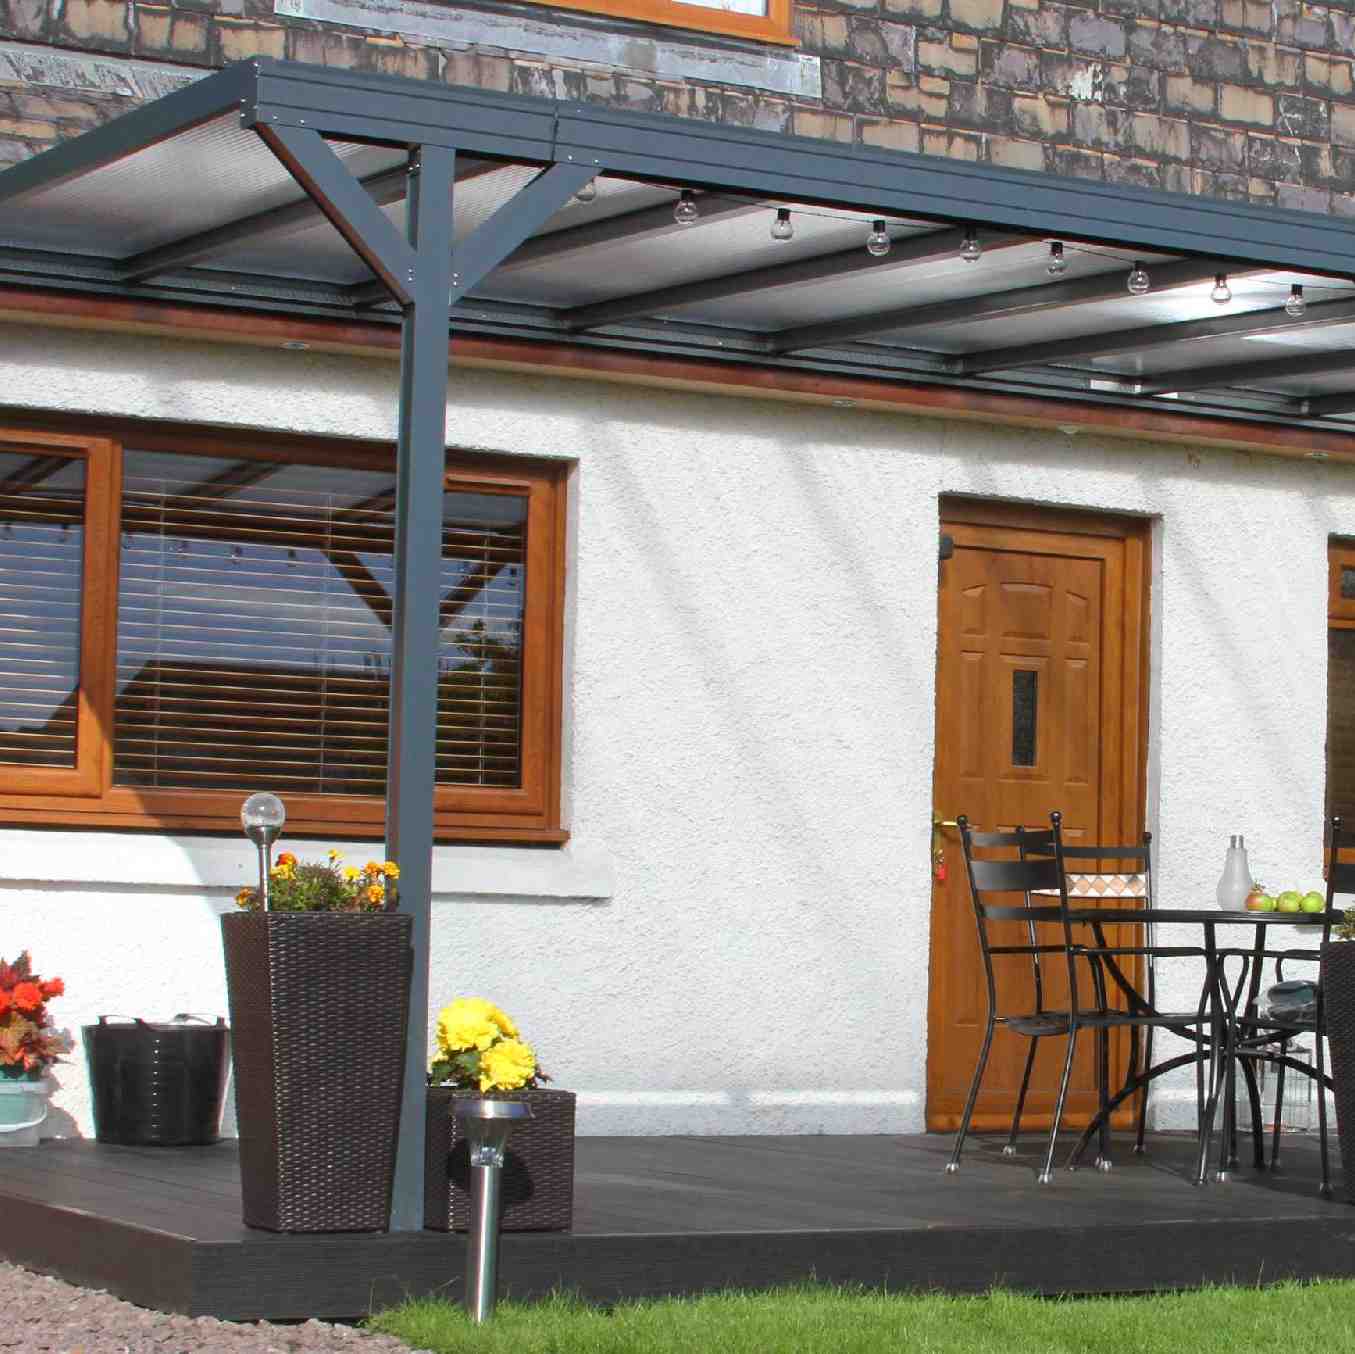 Omega Verandah, Anthracite Grey, 6mm Glass Clear Plate Polycarbonate Glazing - 7.0m (W) x 2.5m (P), (4) Supporting Posts